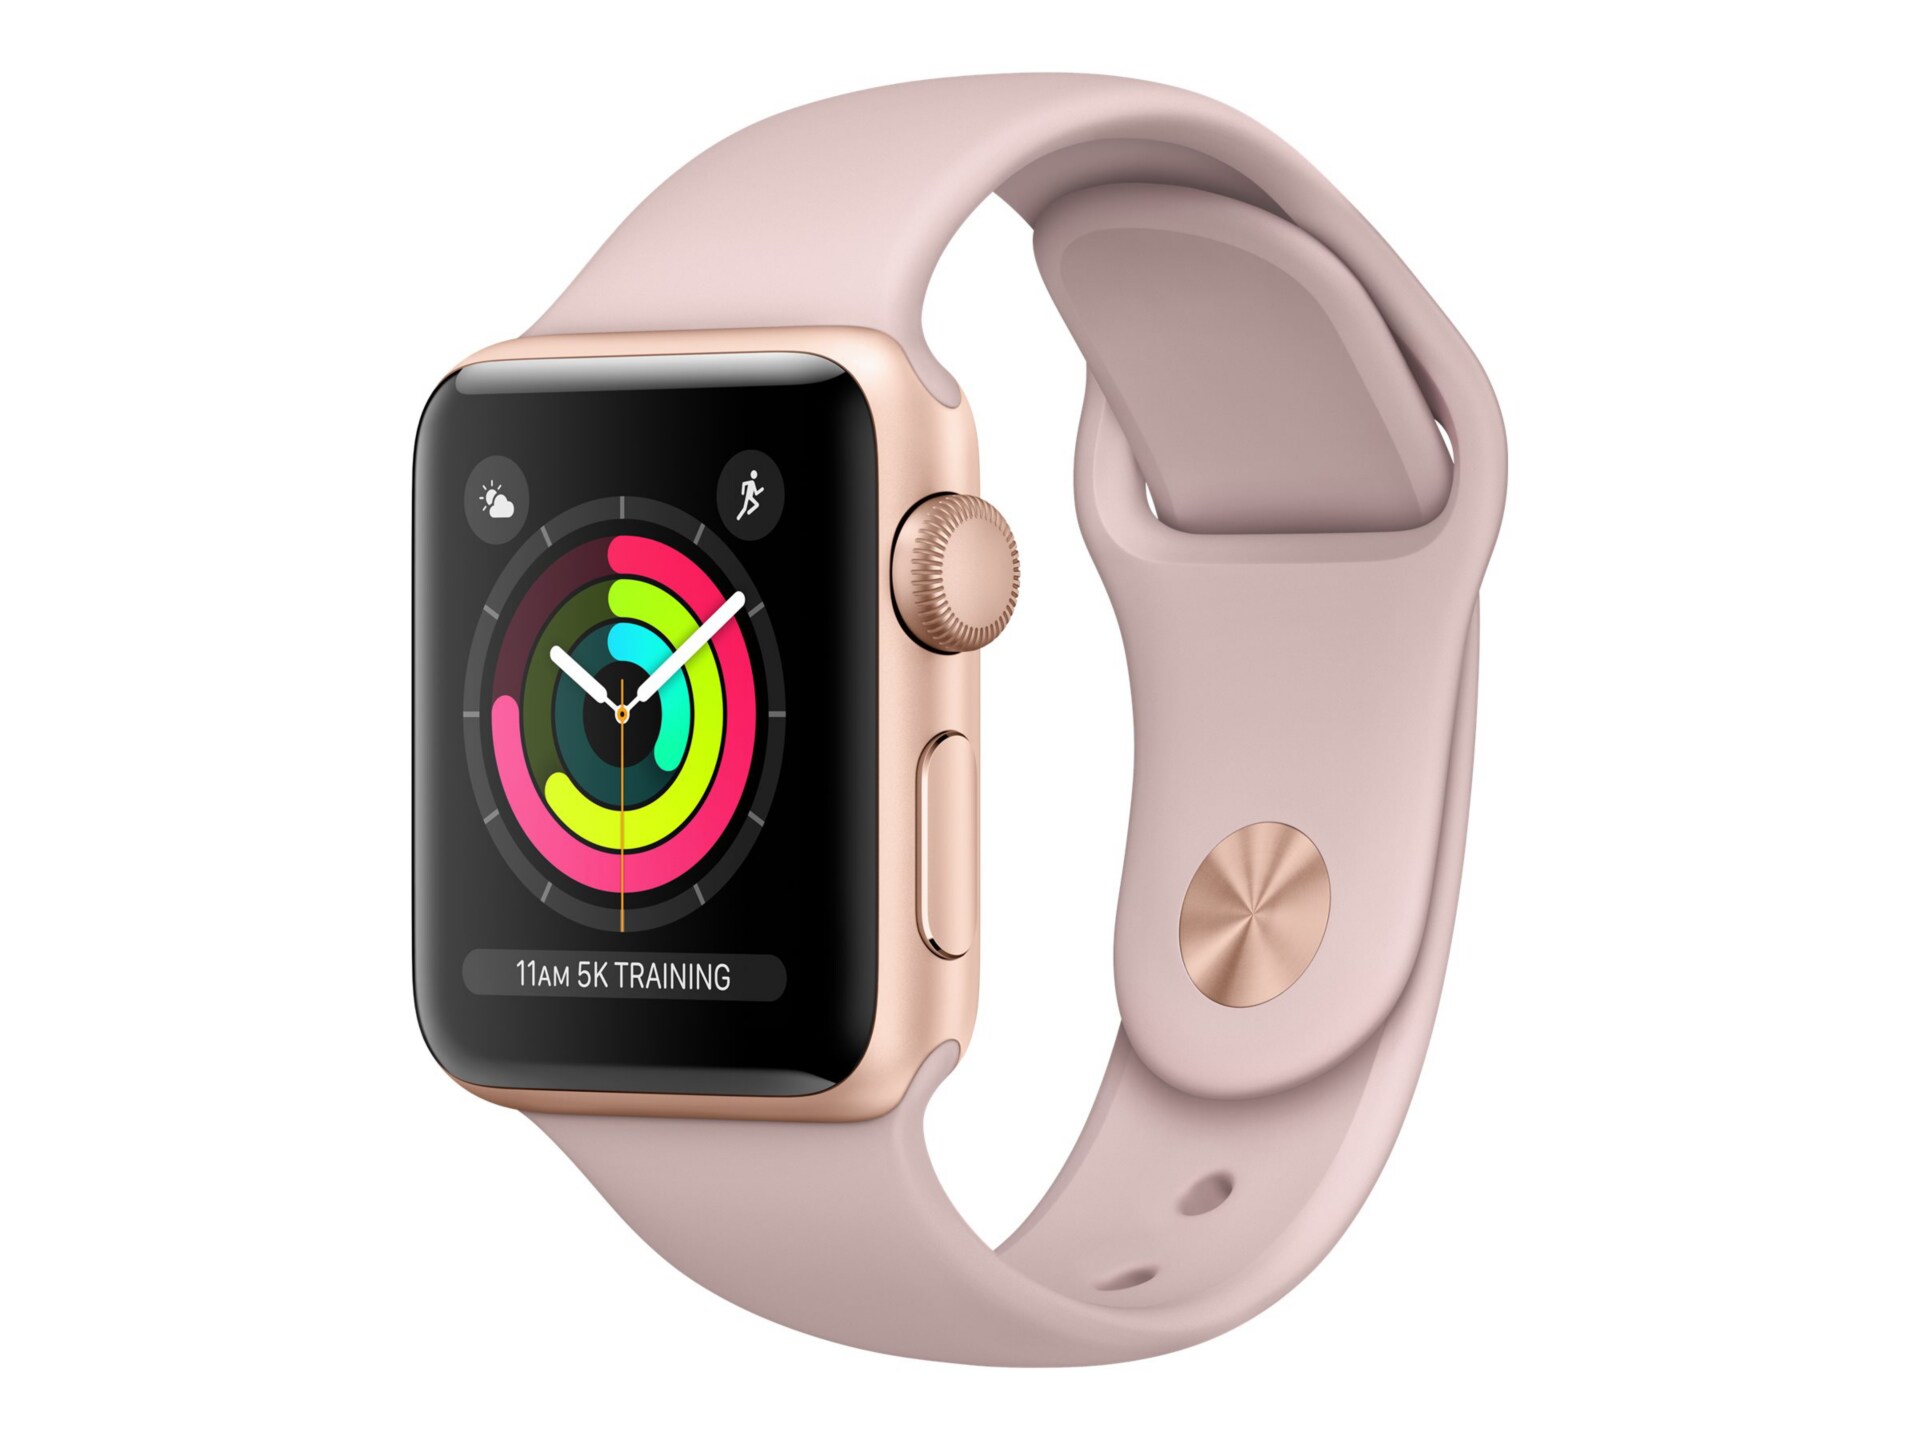 Apple Watch Series 3 (GPS) - gold aluminum - smart watch with sport band - pink sand - 8 GB